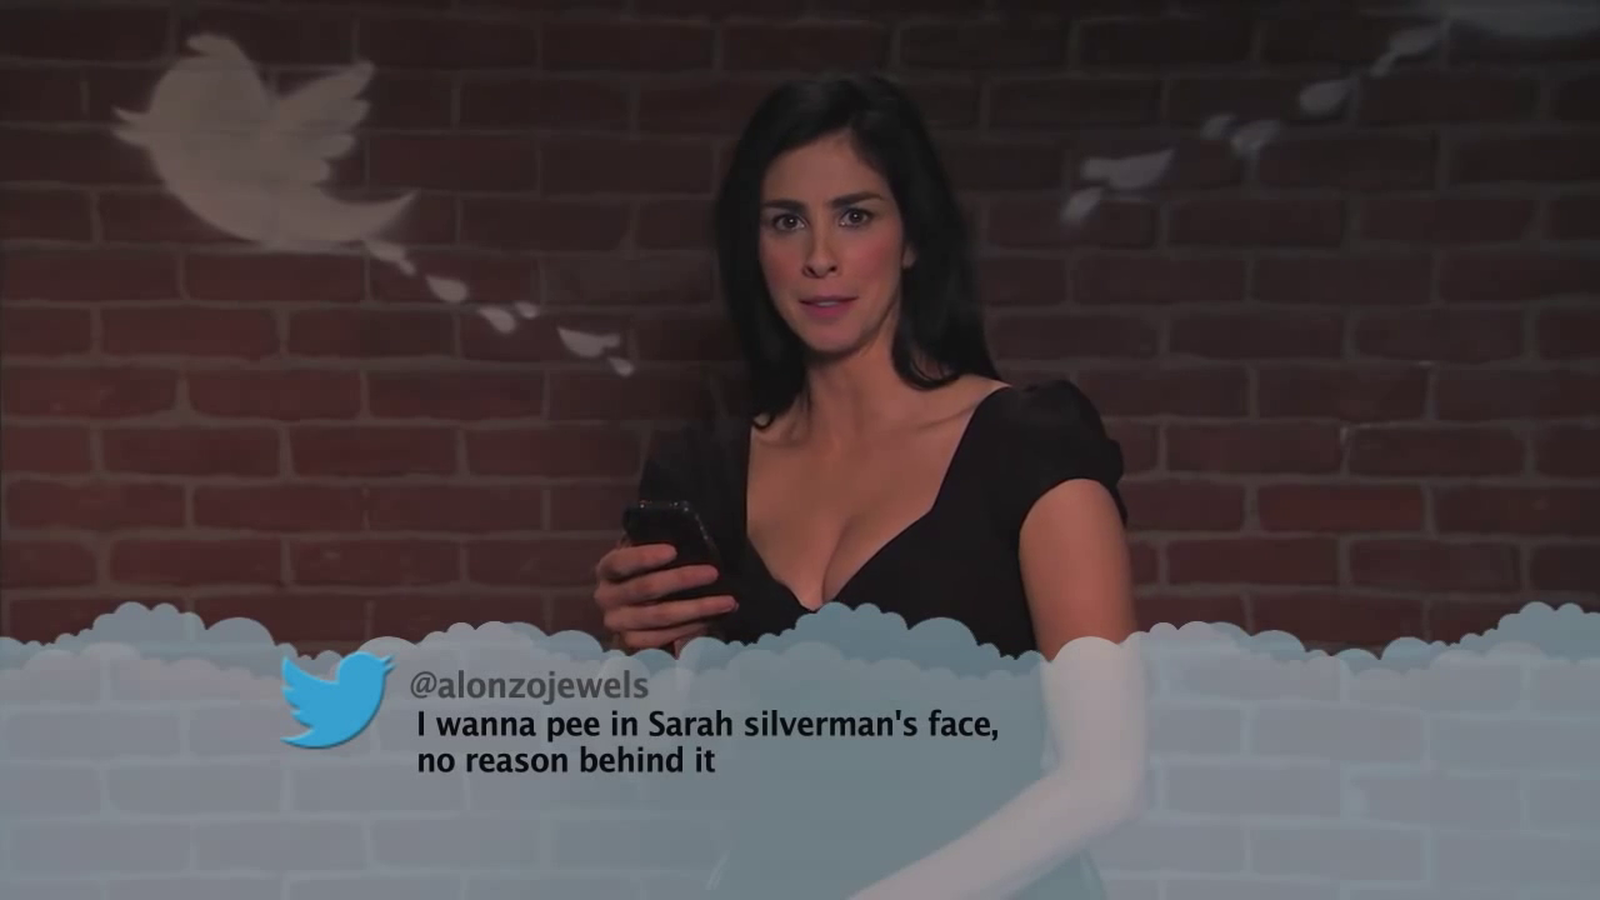 Photo by urodisco with the username @urodisco,  February 22, 2014 at 5:22 PM and the text says '&ldquo;No reason needed&rdquo;, she says.

(from Celebrities Read Mean Tweets #6) #Sarah  #Silverman  #pee  #face  #mean  #tweets  #tv  #read  #twitter  #jimmy  #kimmel  #alonzojewels'